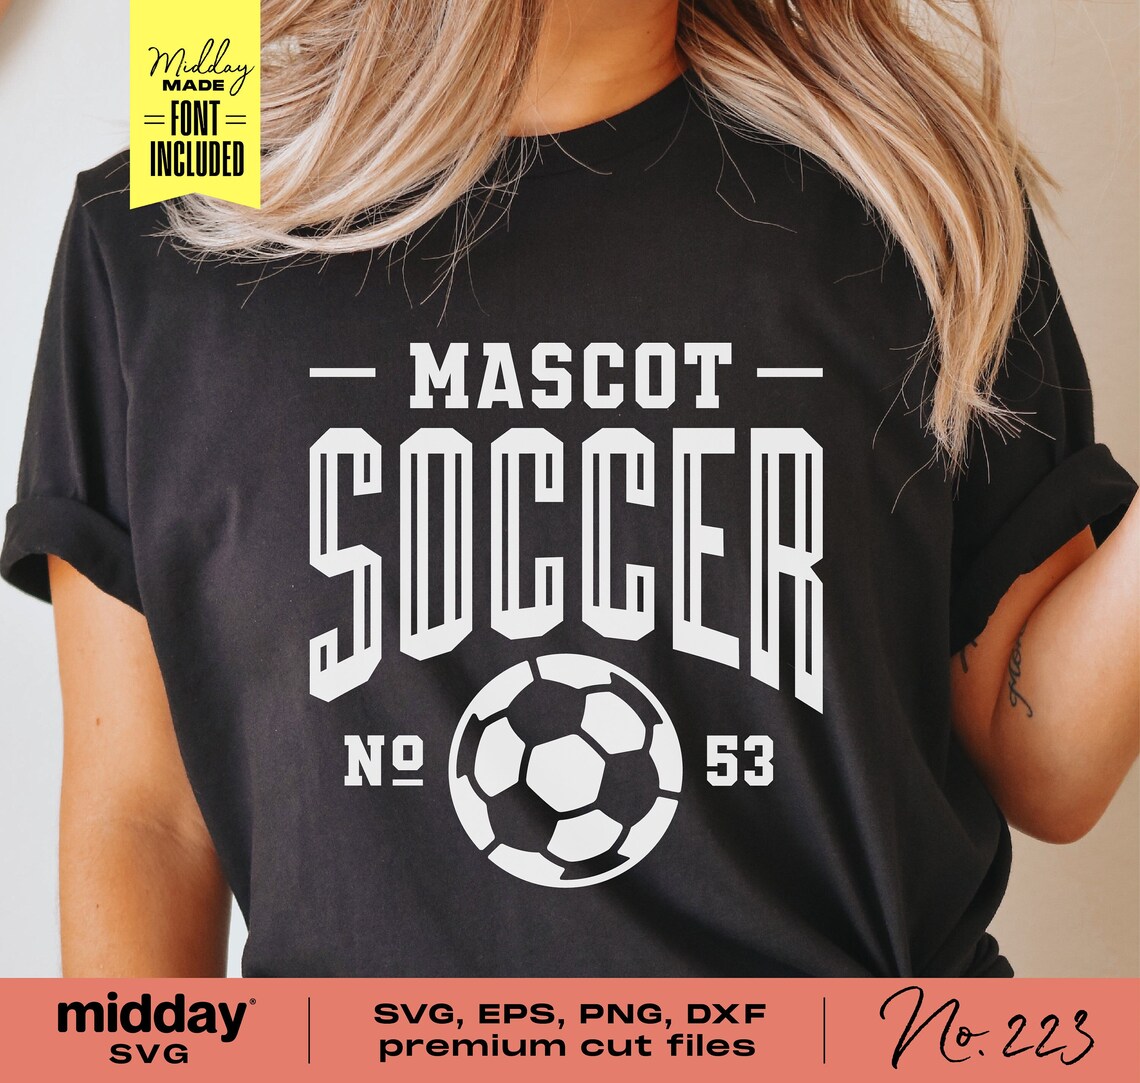 Soccer Team Shirts Svg Png Dxf Eps Soccer Team Template - Etsy